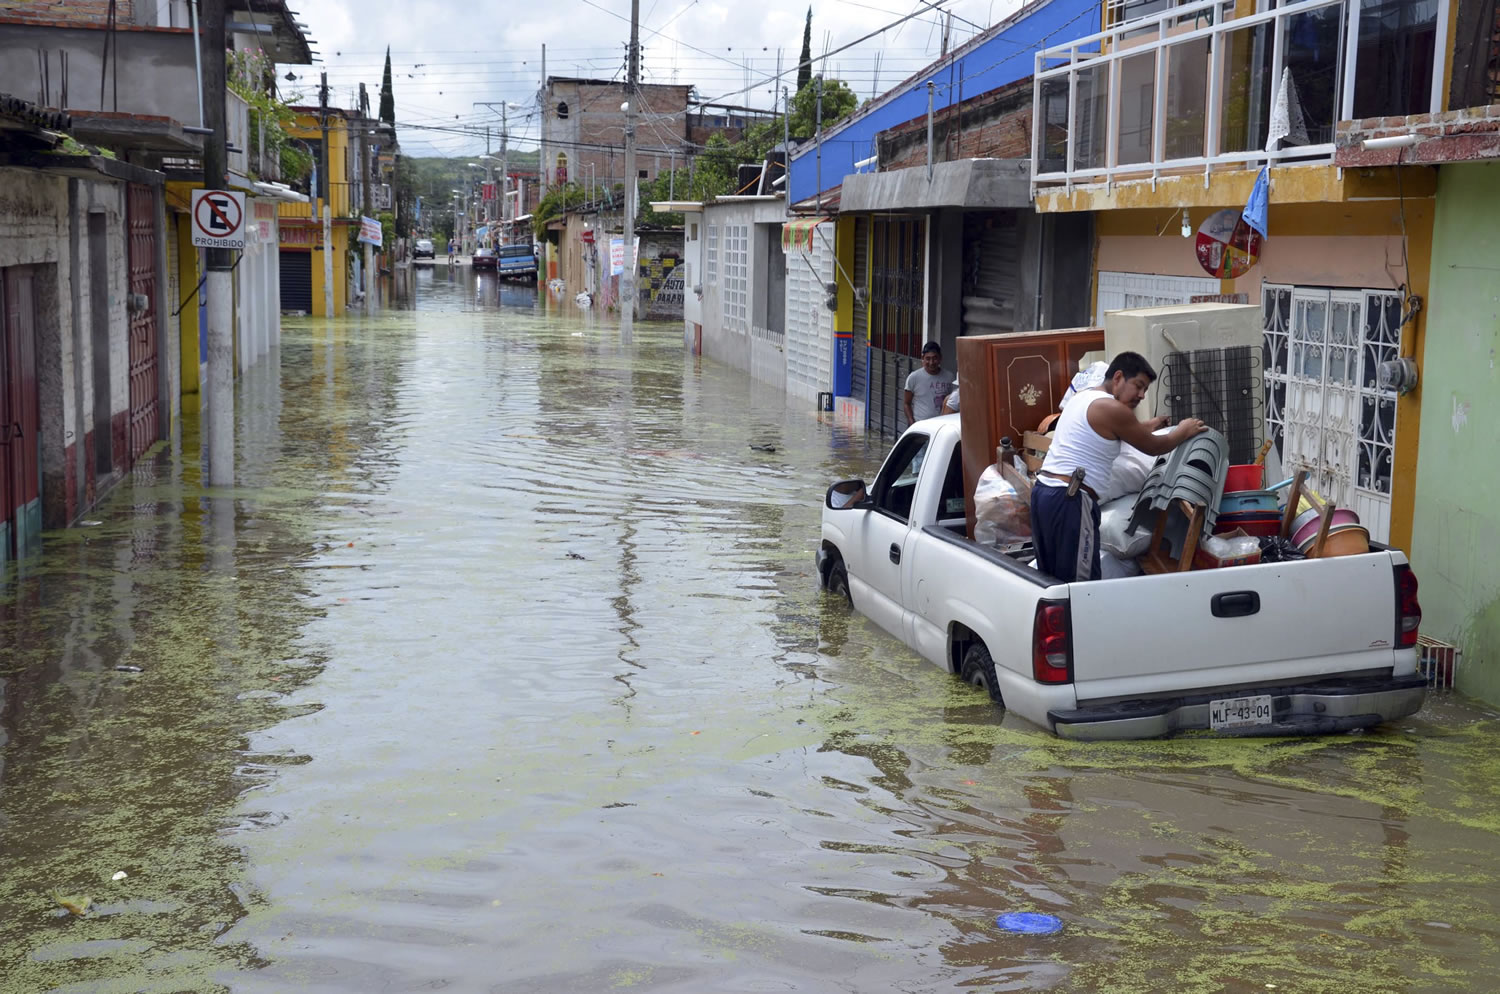 Villagers load belongings into a pickup truck Sunday in a flooded street in Tixtla de Guerrero, Mexico. Tropical Storm Manuel and Ingrid affected 24 of Mexico's 31 states and 371 municipalities, which are the equivalent of counties. More than 58,000 people were evacuated, with 43,000 taken to shelters.